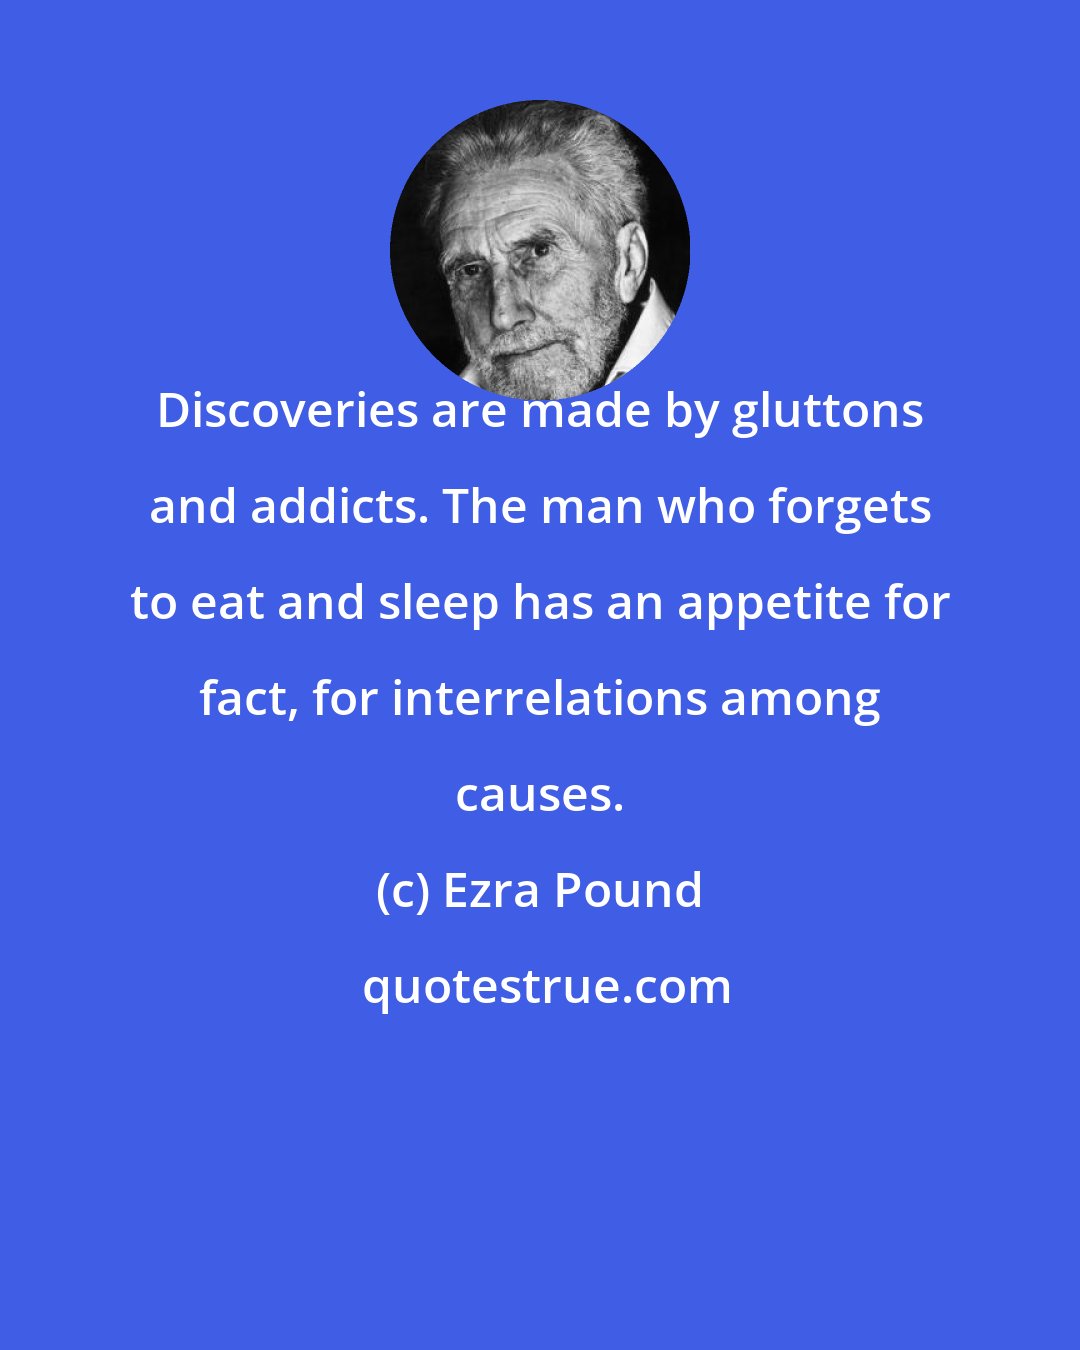 Ezra Pound: Discoveries are made by gluttons and addicts. The man who forgets to eat and sleep has an appetite for fact, for interrelations among causes.